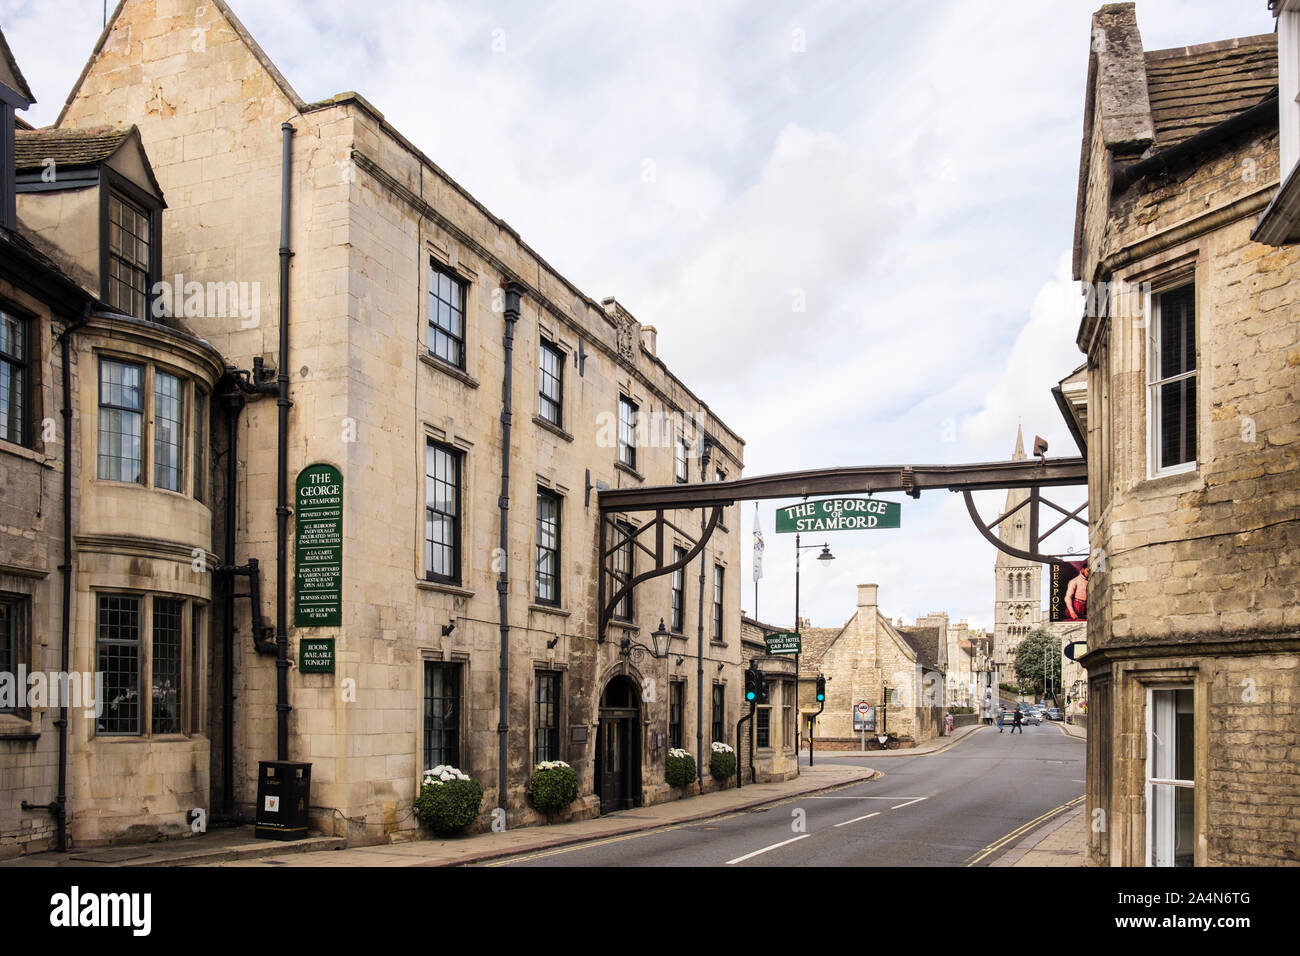 The George Hotel and sign across the main road. Stamford, Lincolnshire, England, UK, Britain Stock Photo